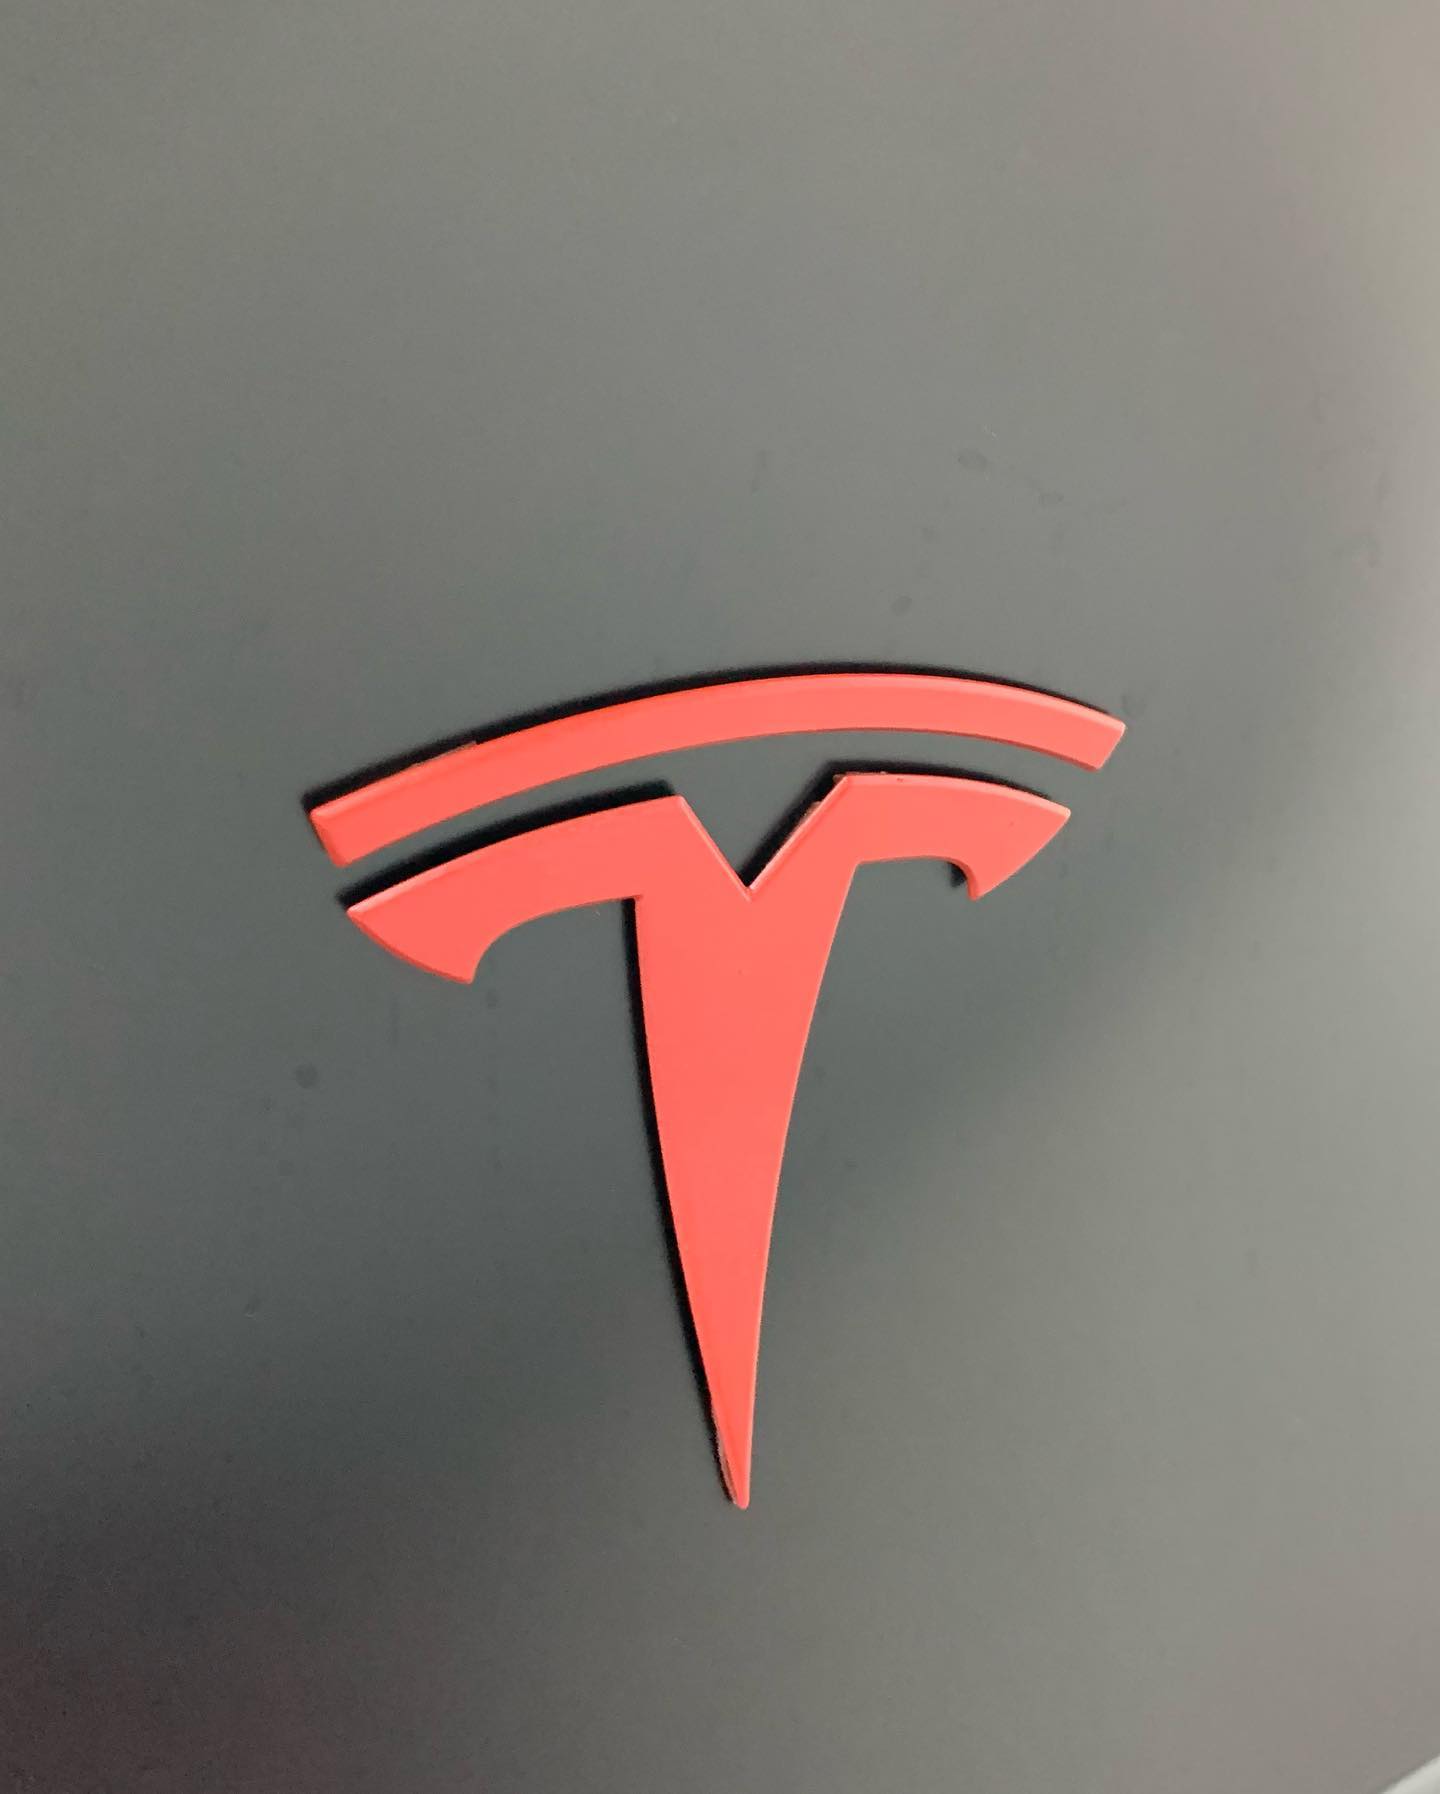 Best Paint Correction & Ceramic Coating for a Tesla Best Paint Correction & Ceramic Coating for a tesla model 3